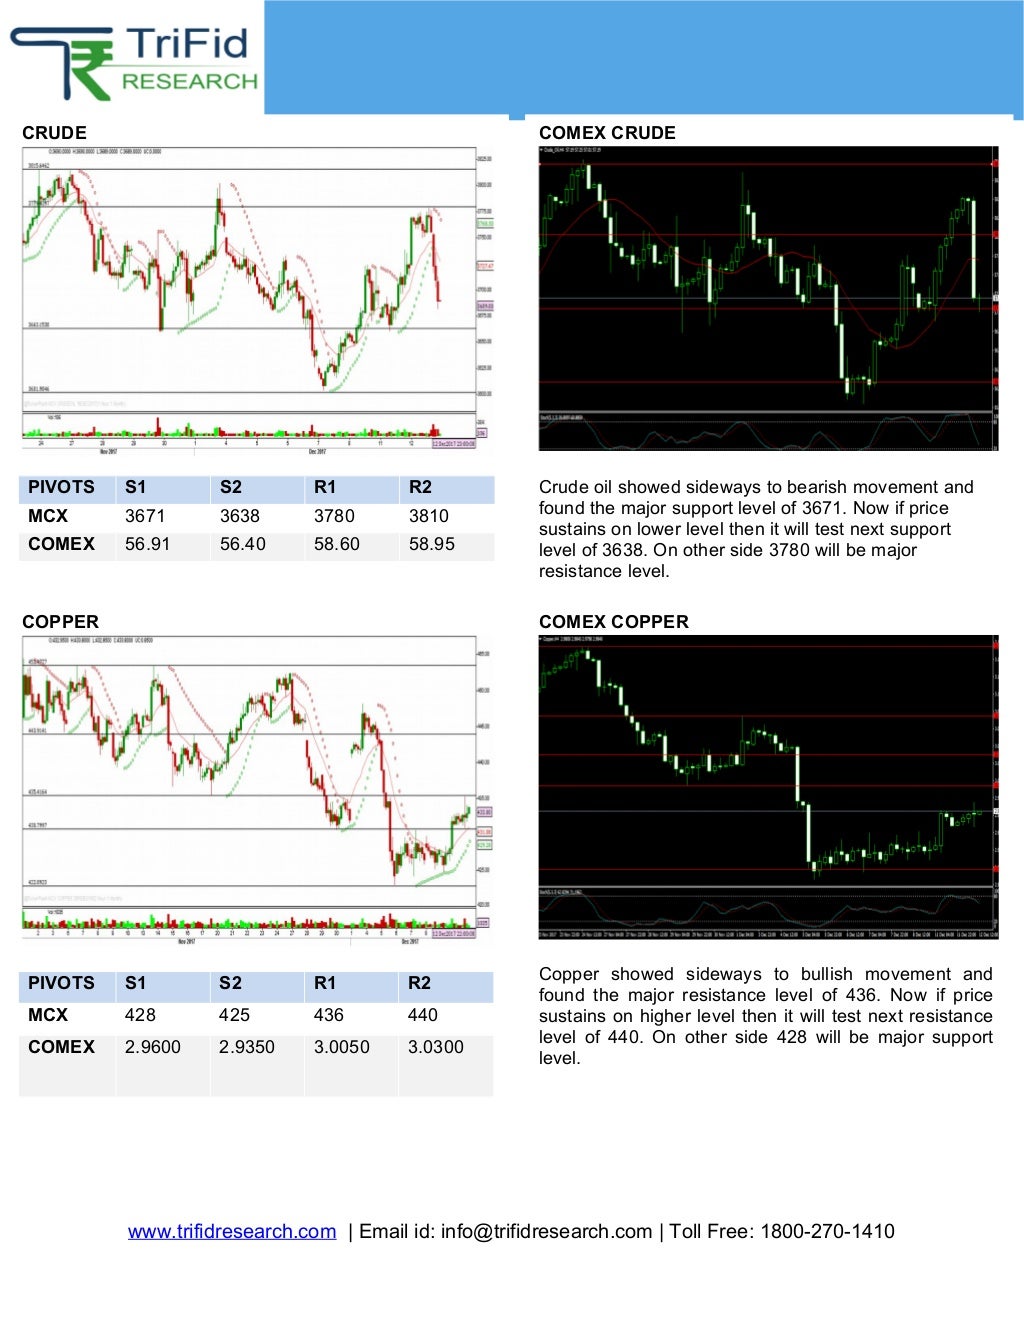 Today's Crude Oil Market Movement and MCX Tips